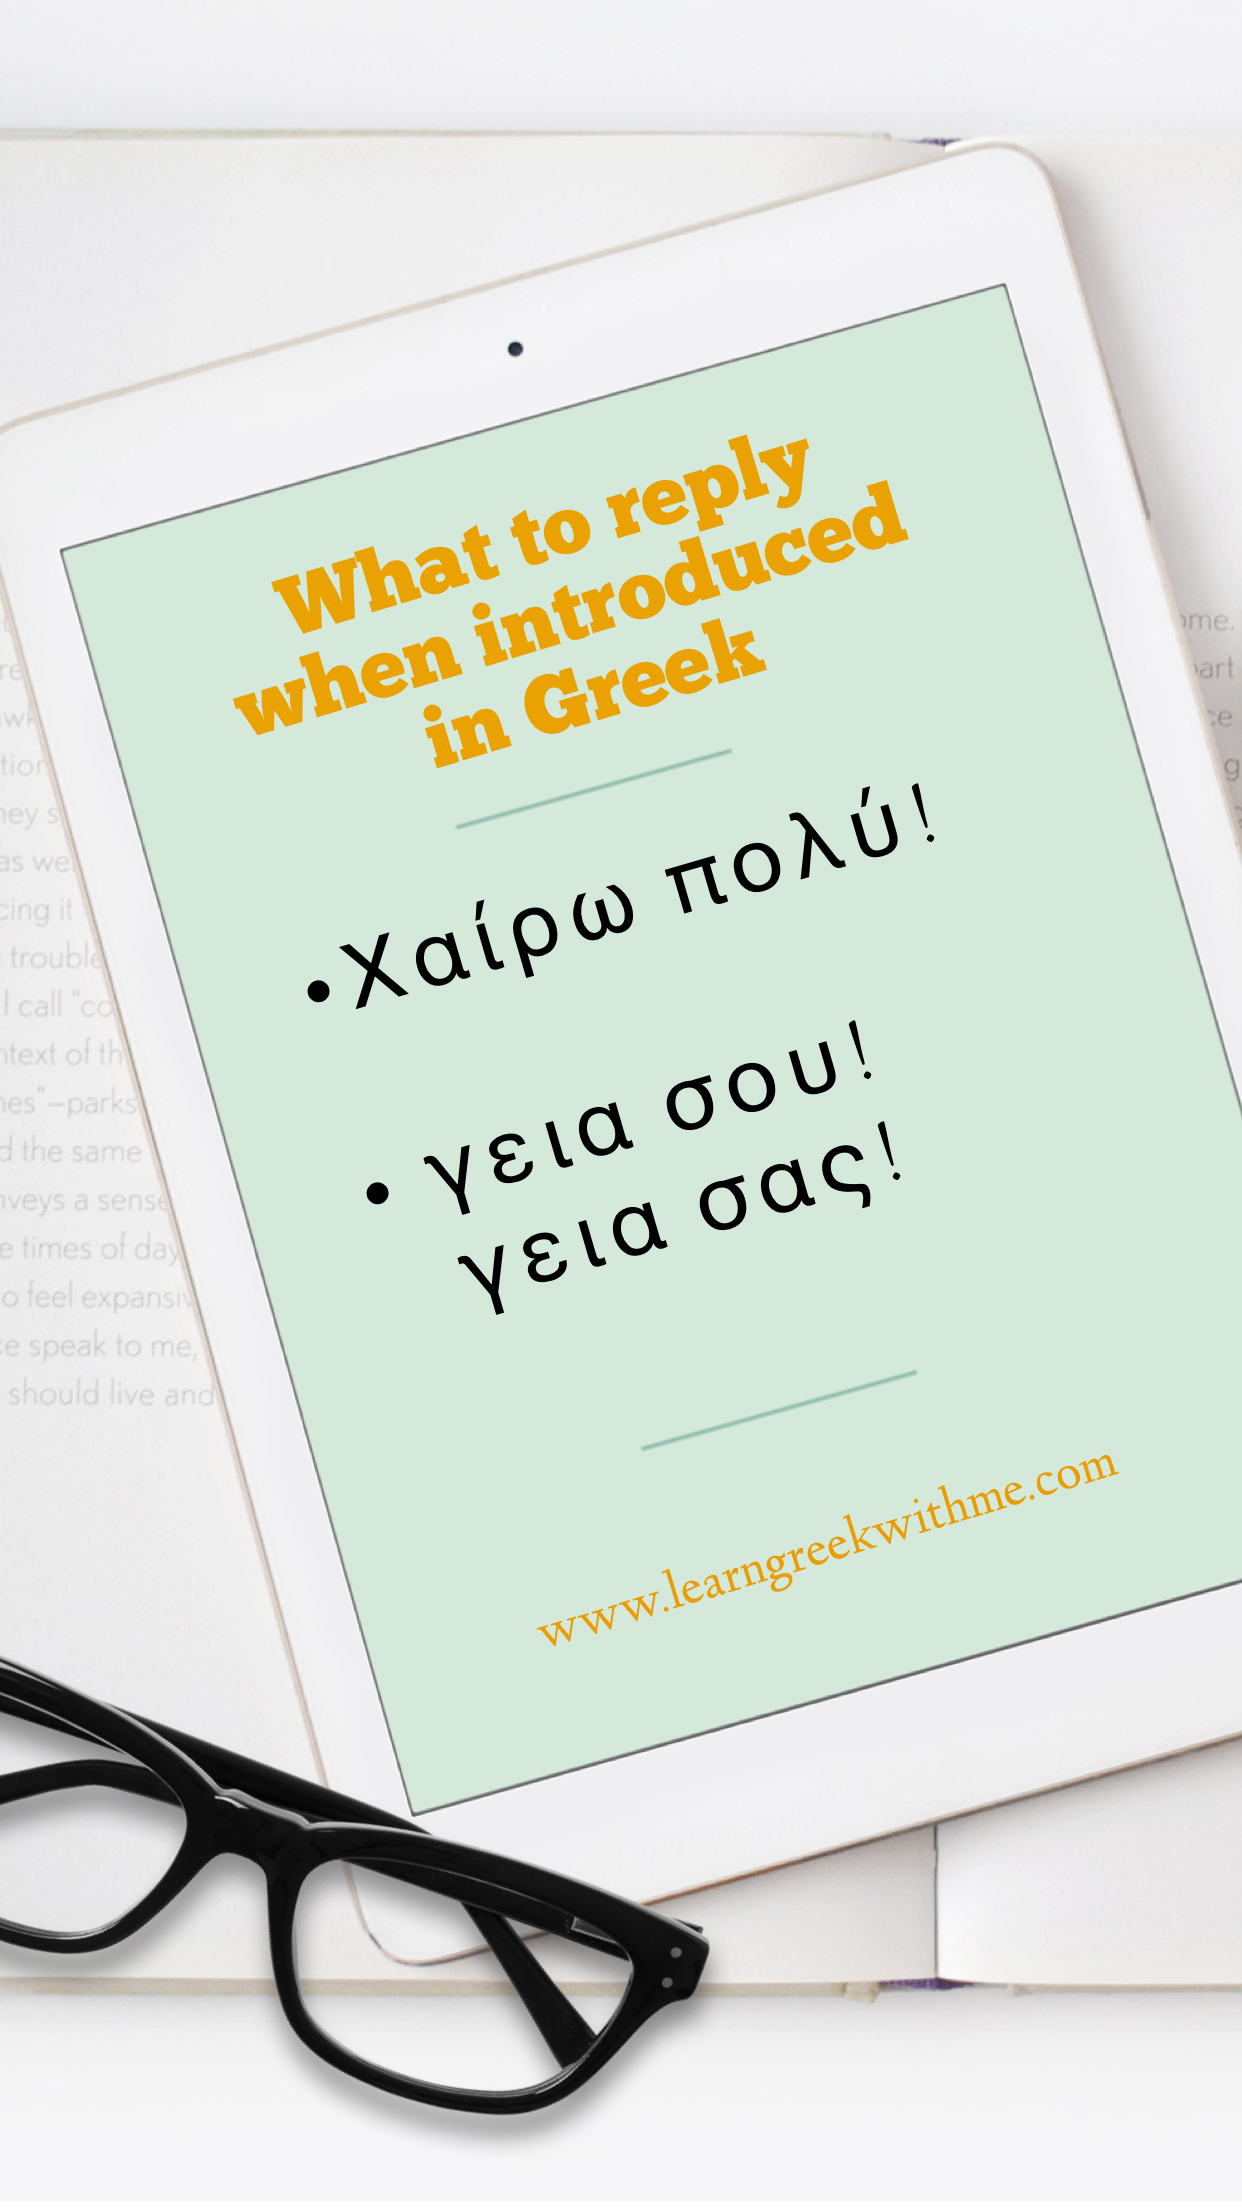 What to say when introduced in Greek